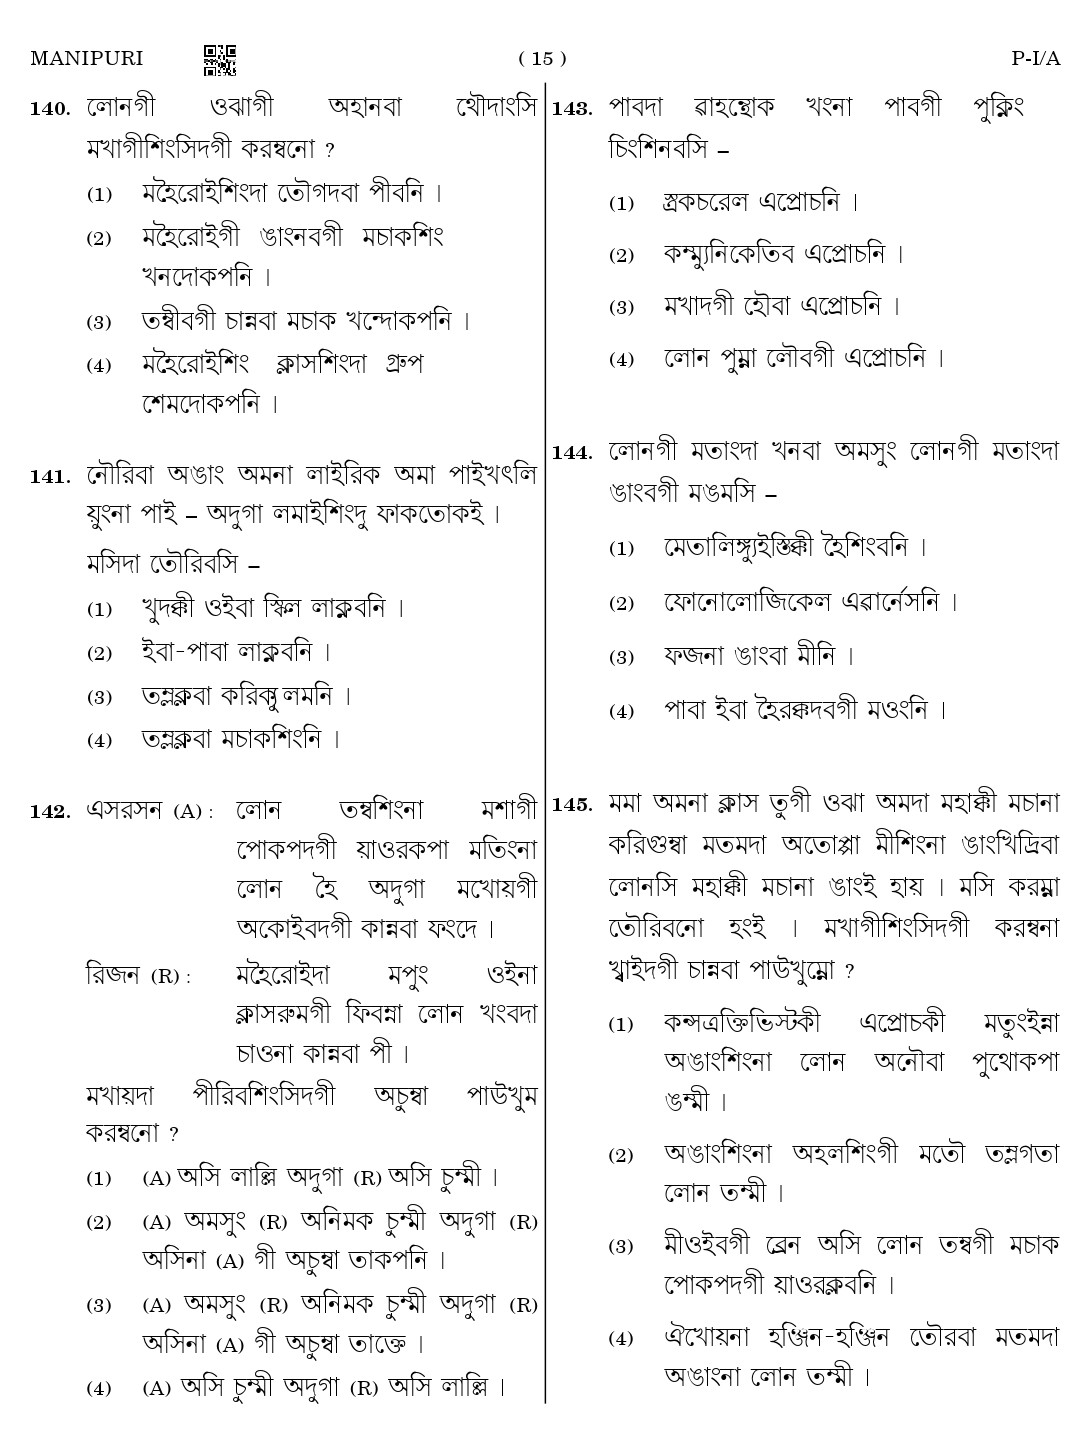 CTET August 2023 Manipuri Paper 1 Part IV and V 15